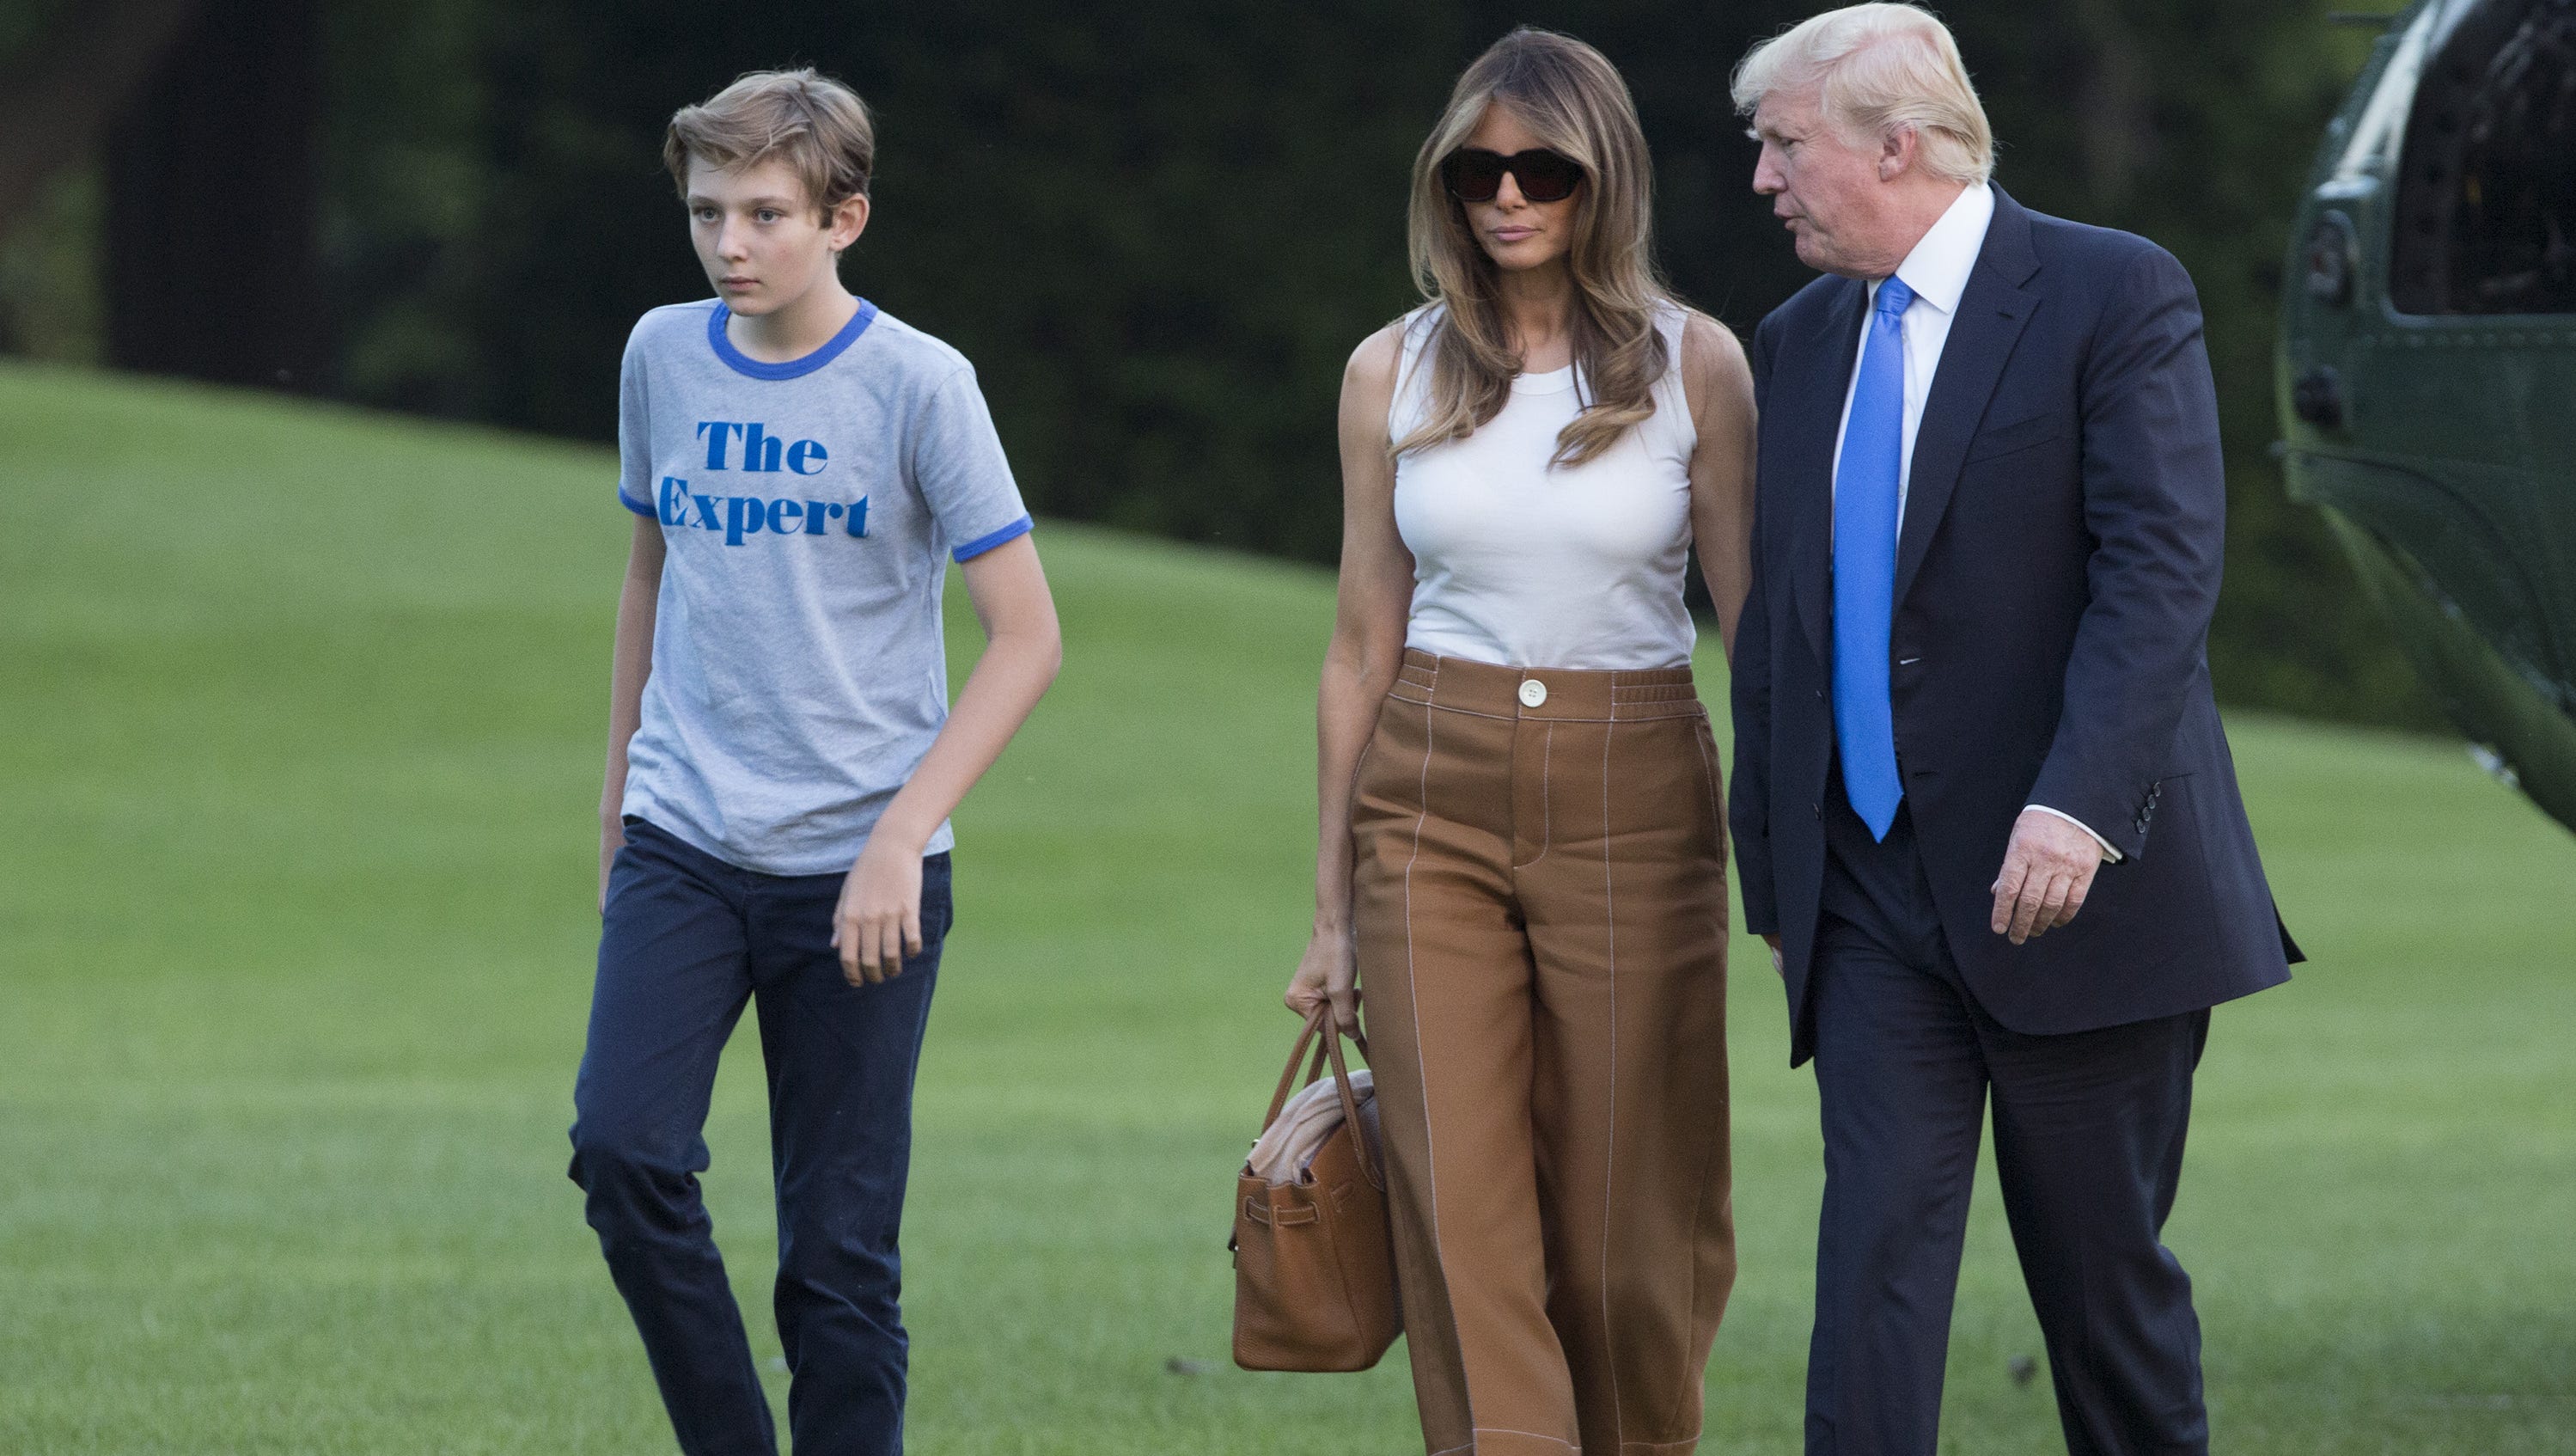 First lady Melania Trump, son Barron officially move into the White House